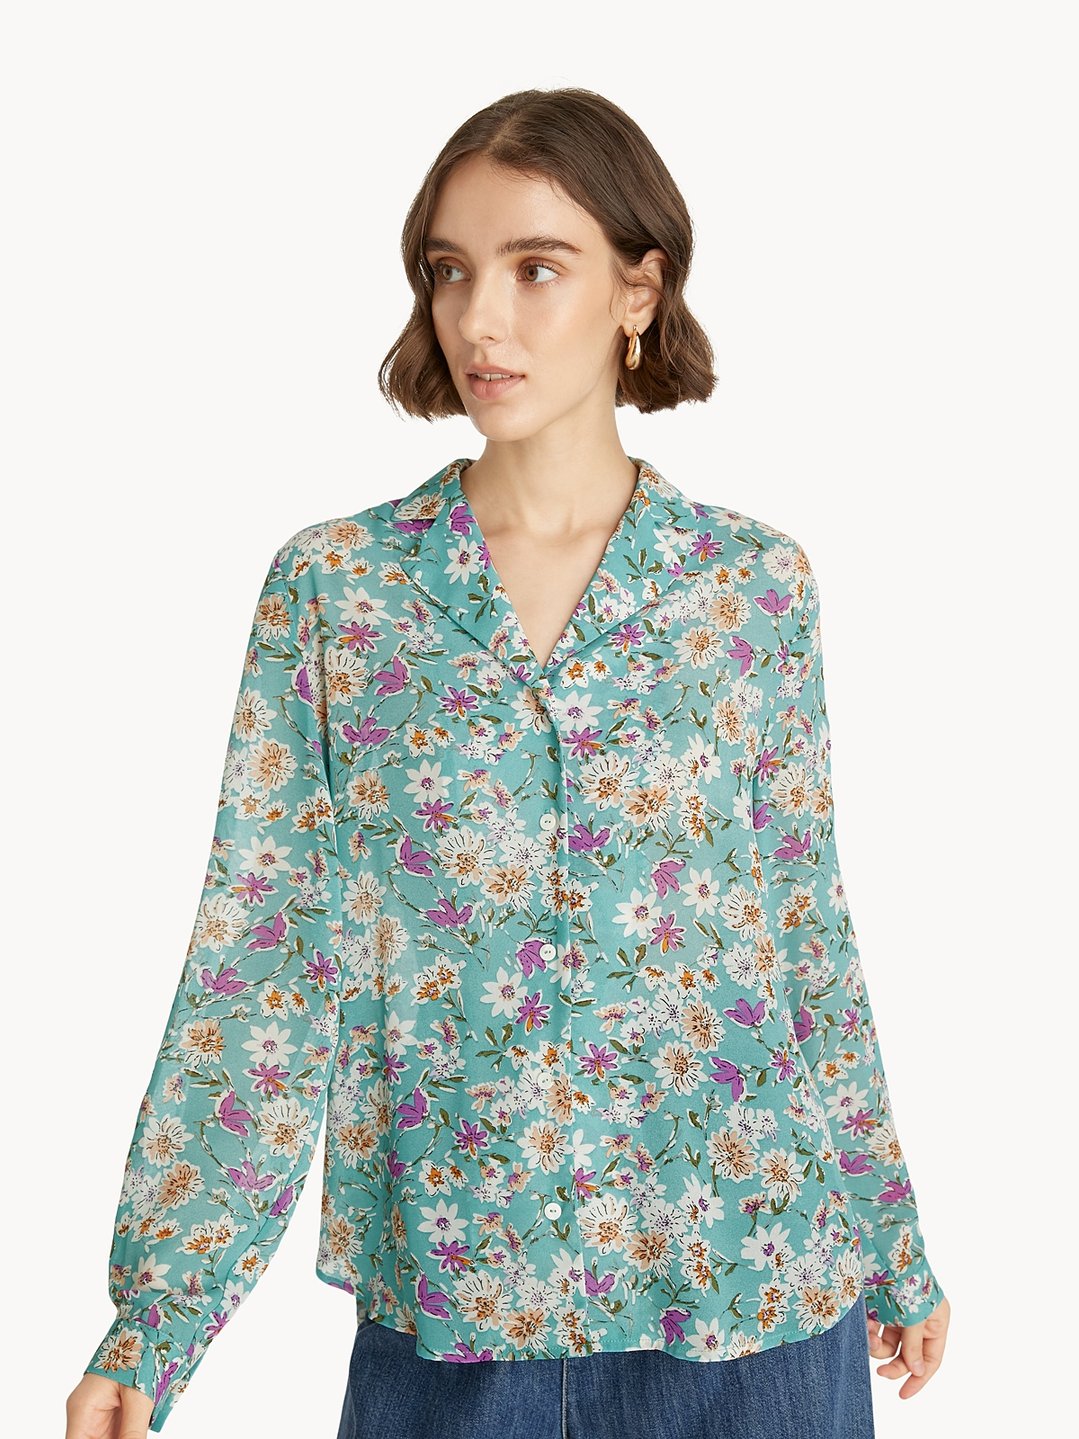 Colorful Floral Button Up Shirt - Green